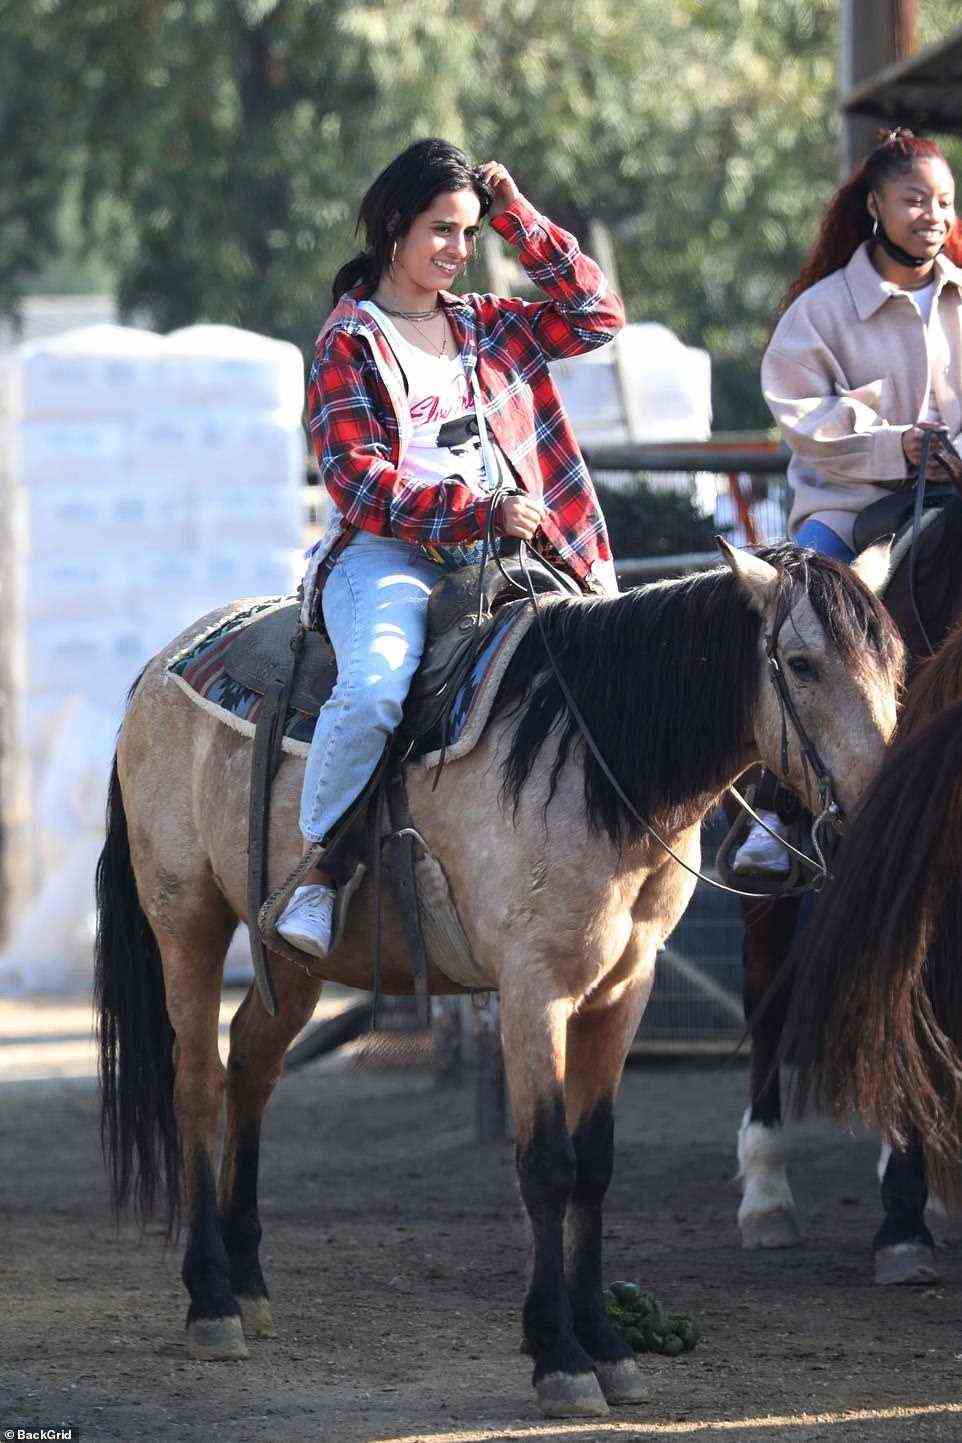 Just vibes: Camila certainly seemed to enjoy the day of horseback riding as she looked completely at ease while atop the four-legged animal